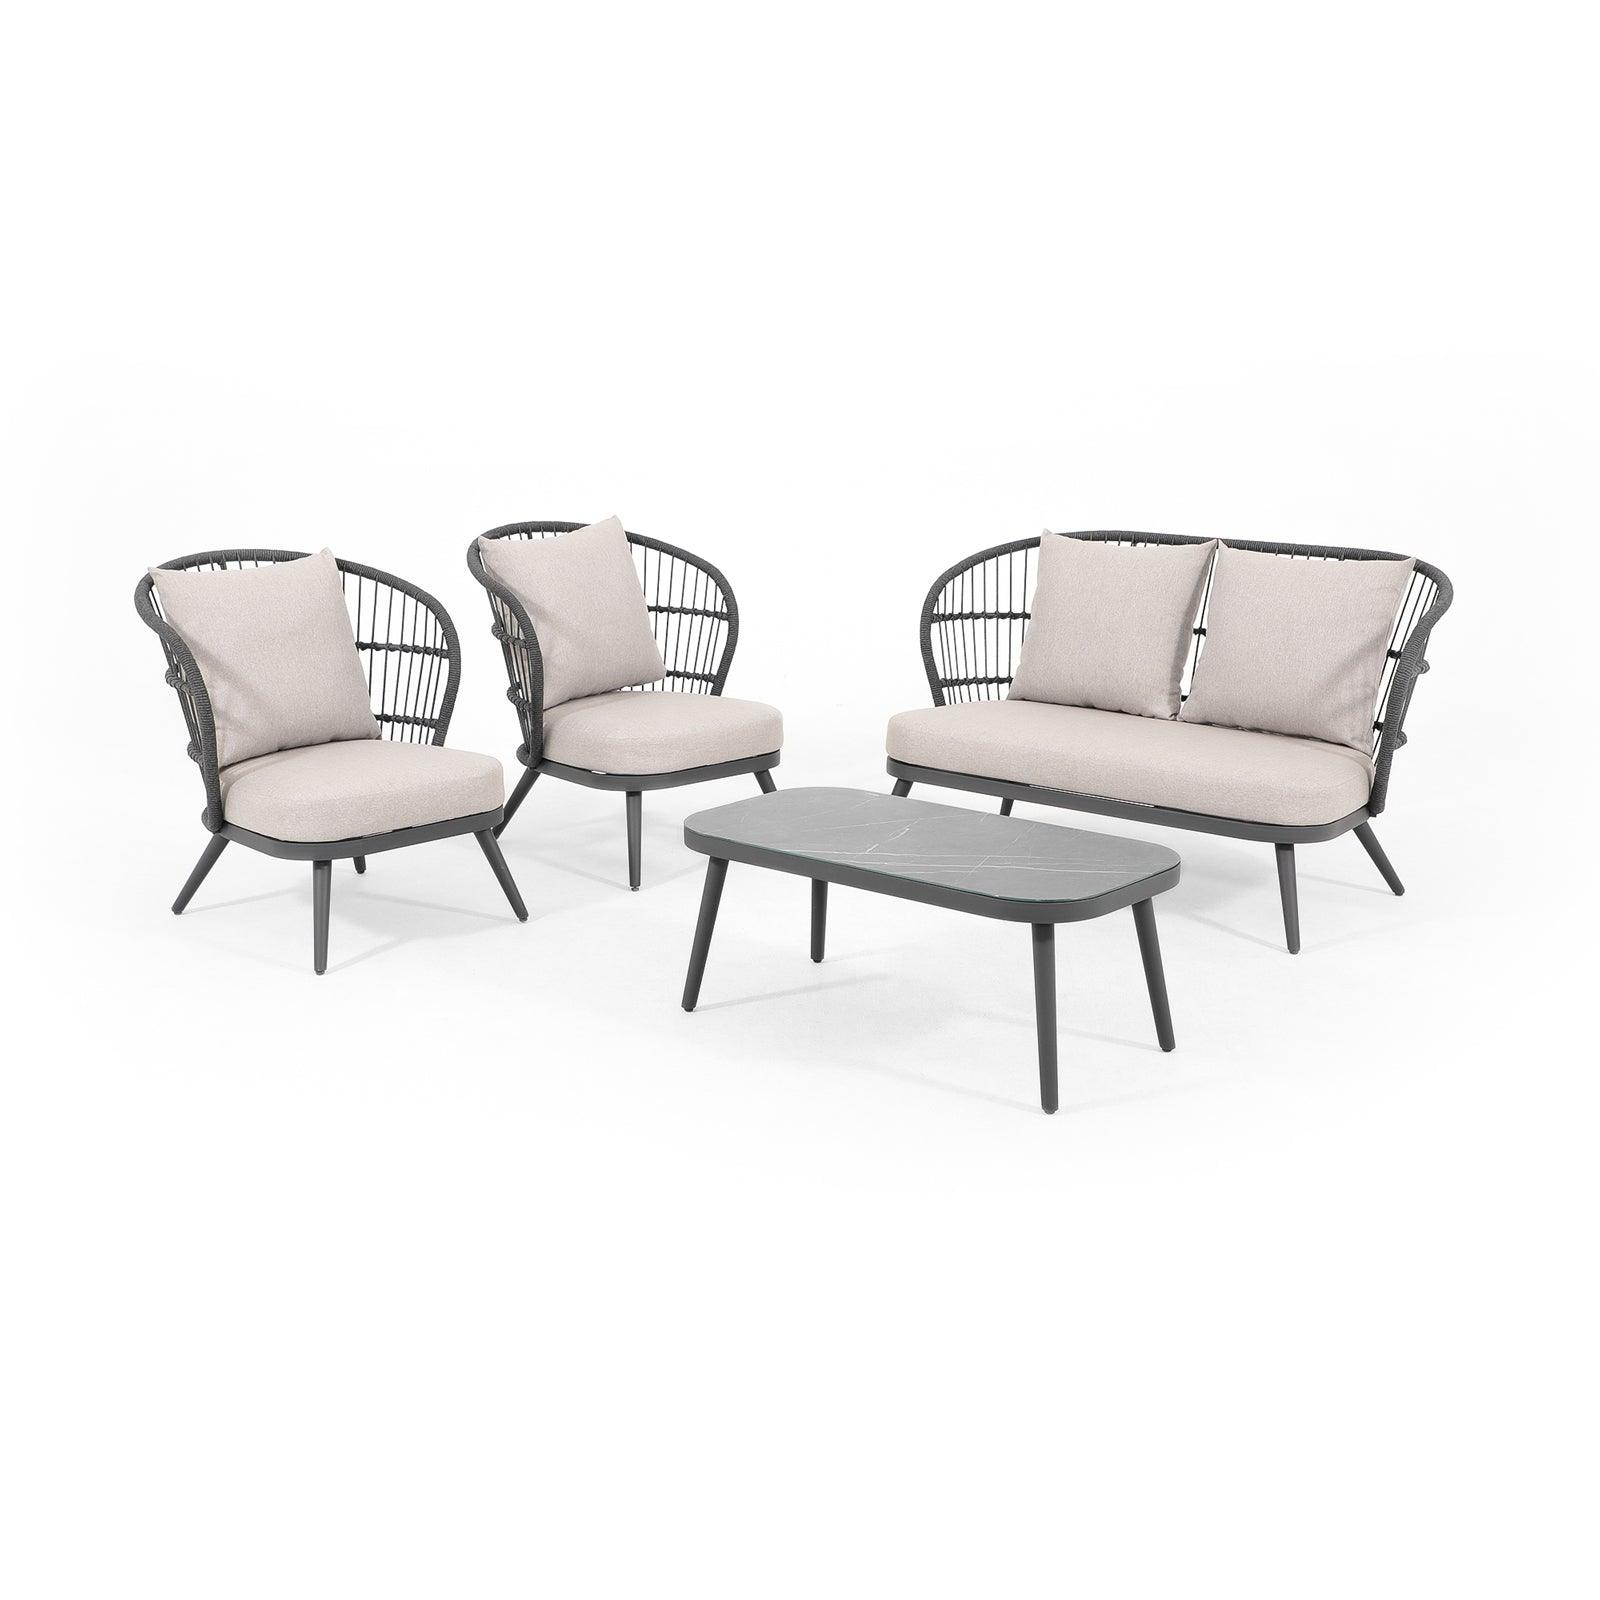 Comino 4-Piece dark grey aluminum Sofa Set with backrest rope design and light grey cushions, including a loveseat, 2 armchairs, 1 coffee table, side view - Jardina Furniture